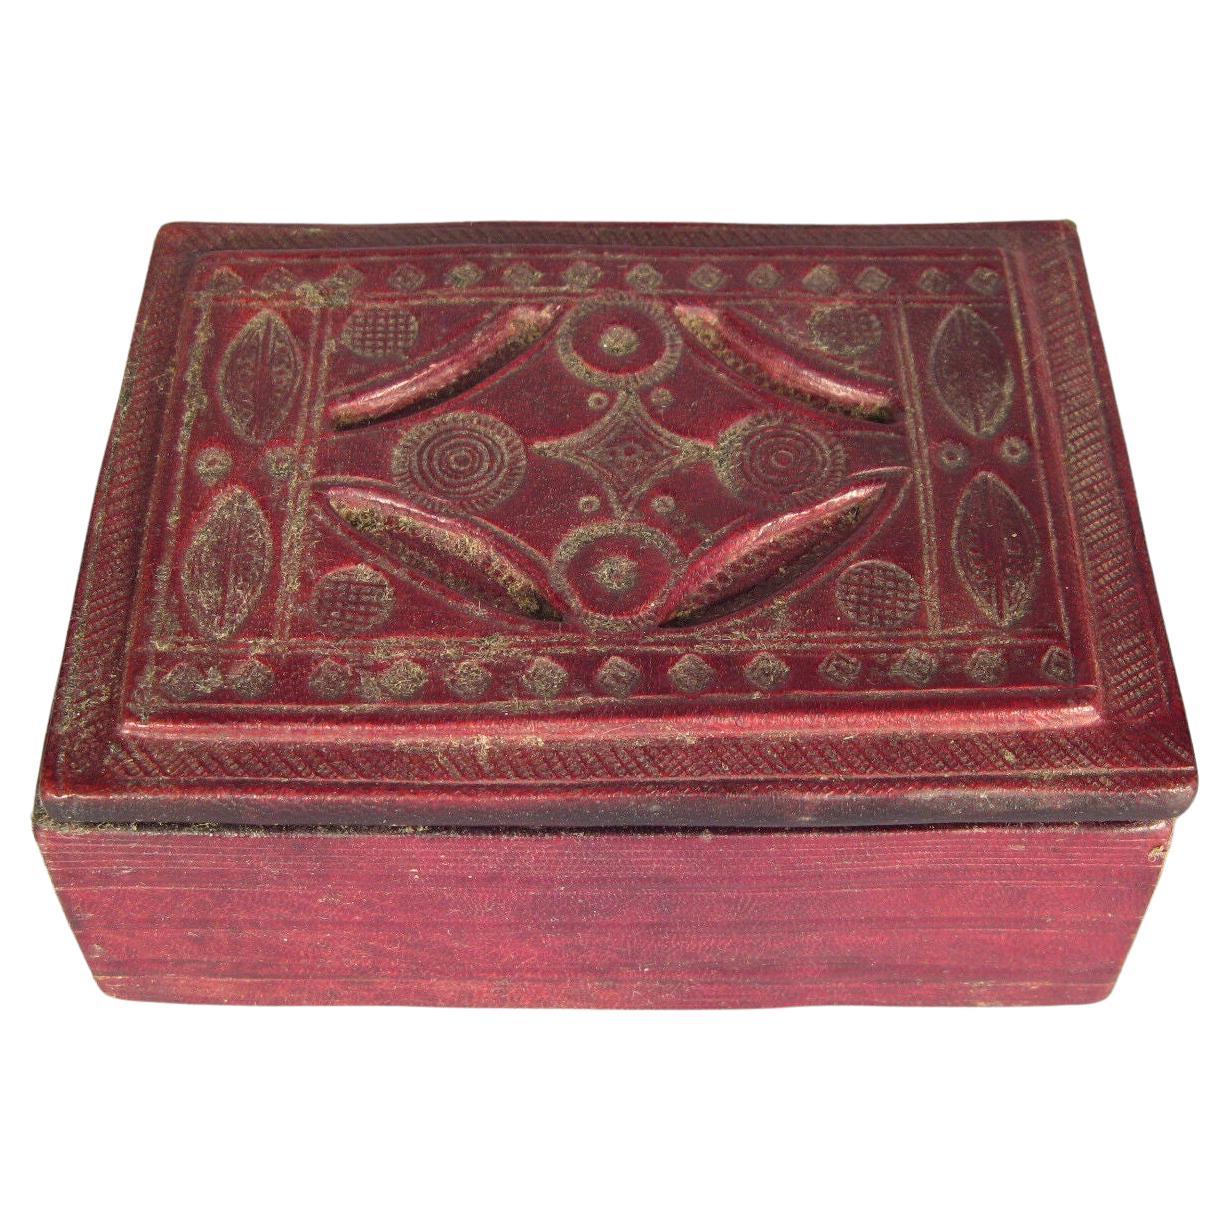 Vintage Leather Playing Card Case in Garnet Red -1Y16